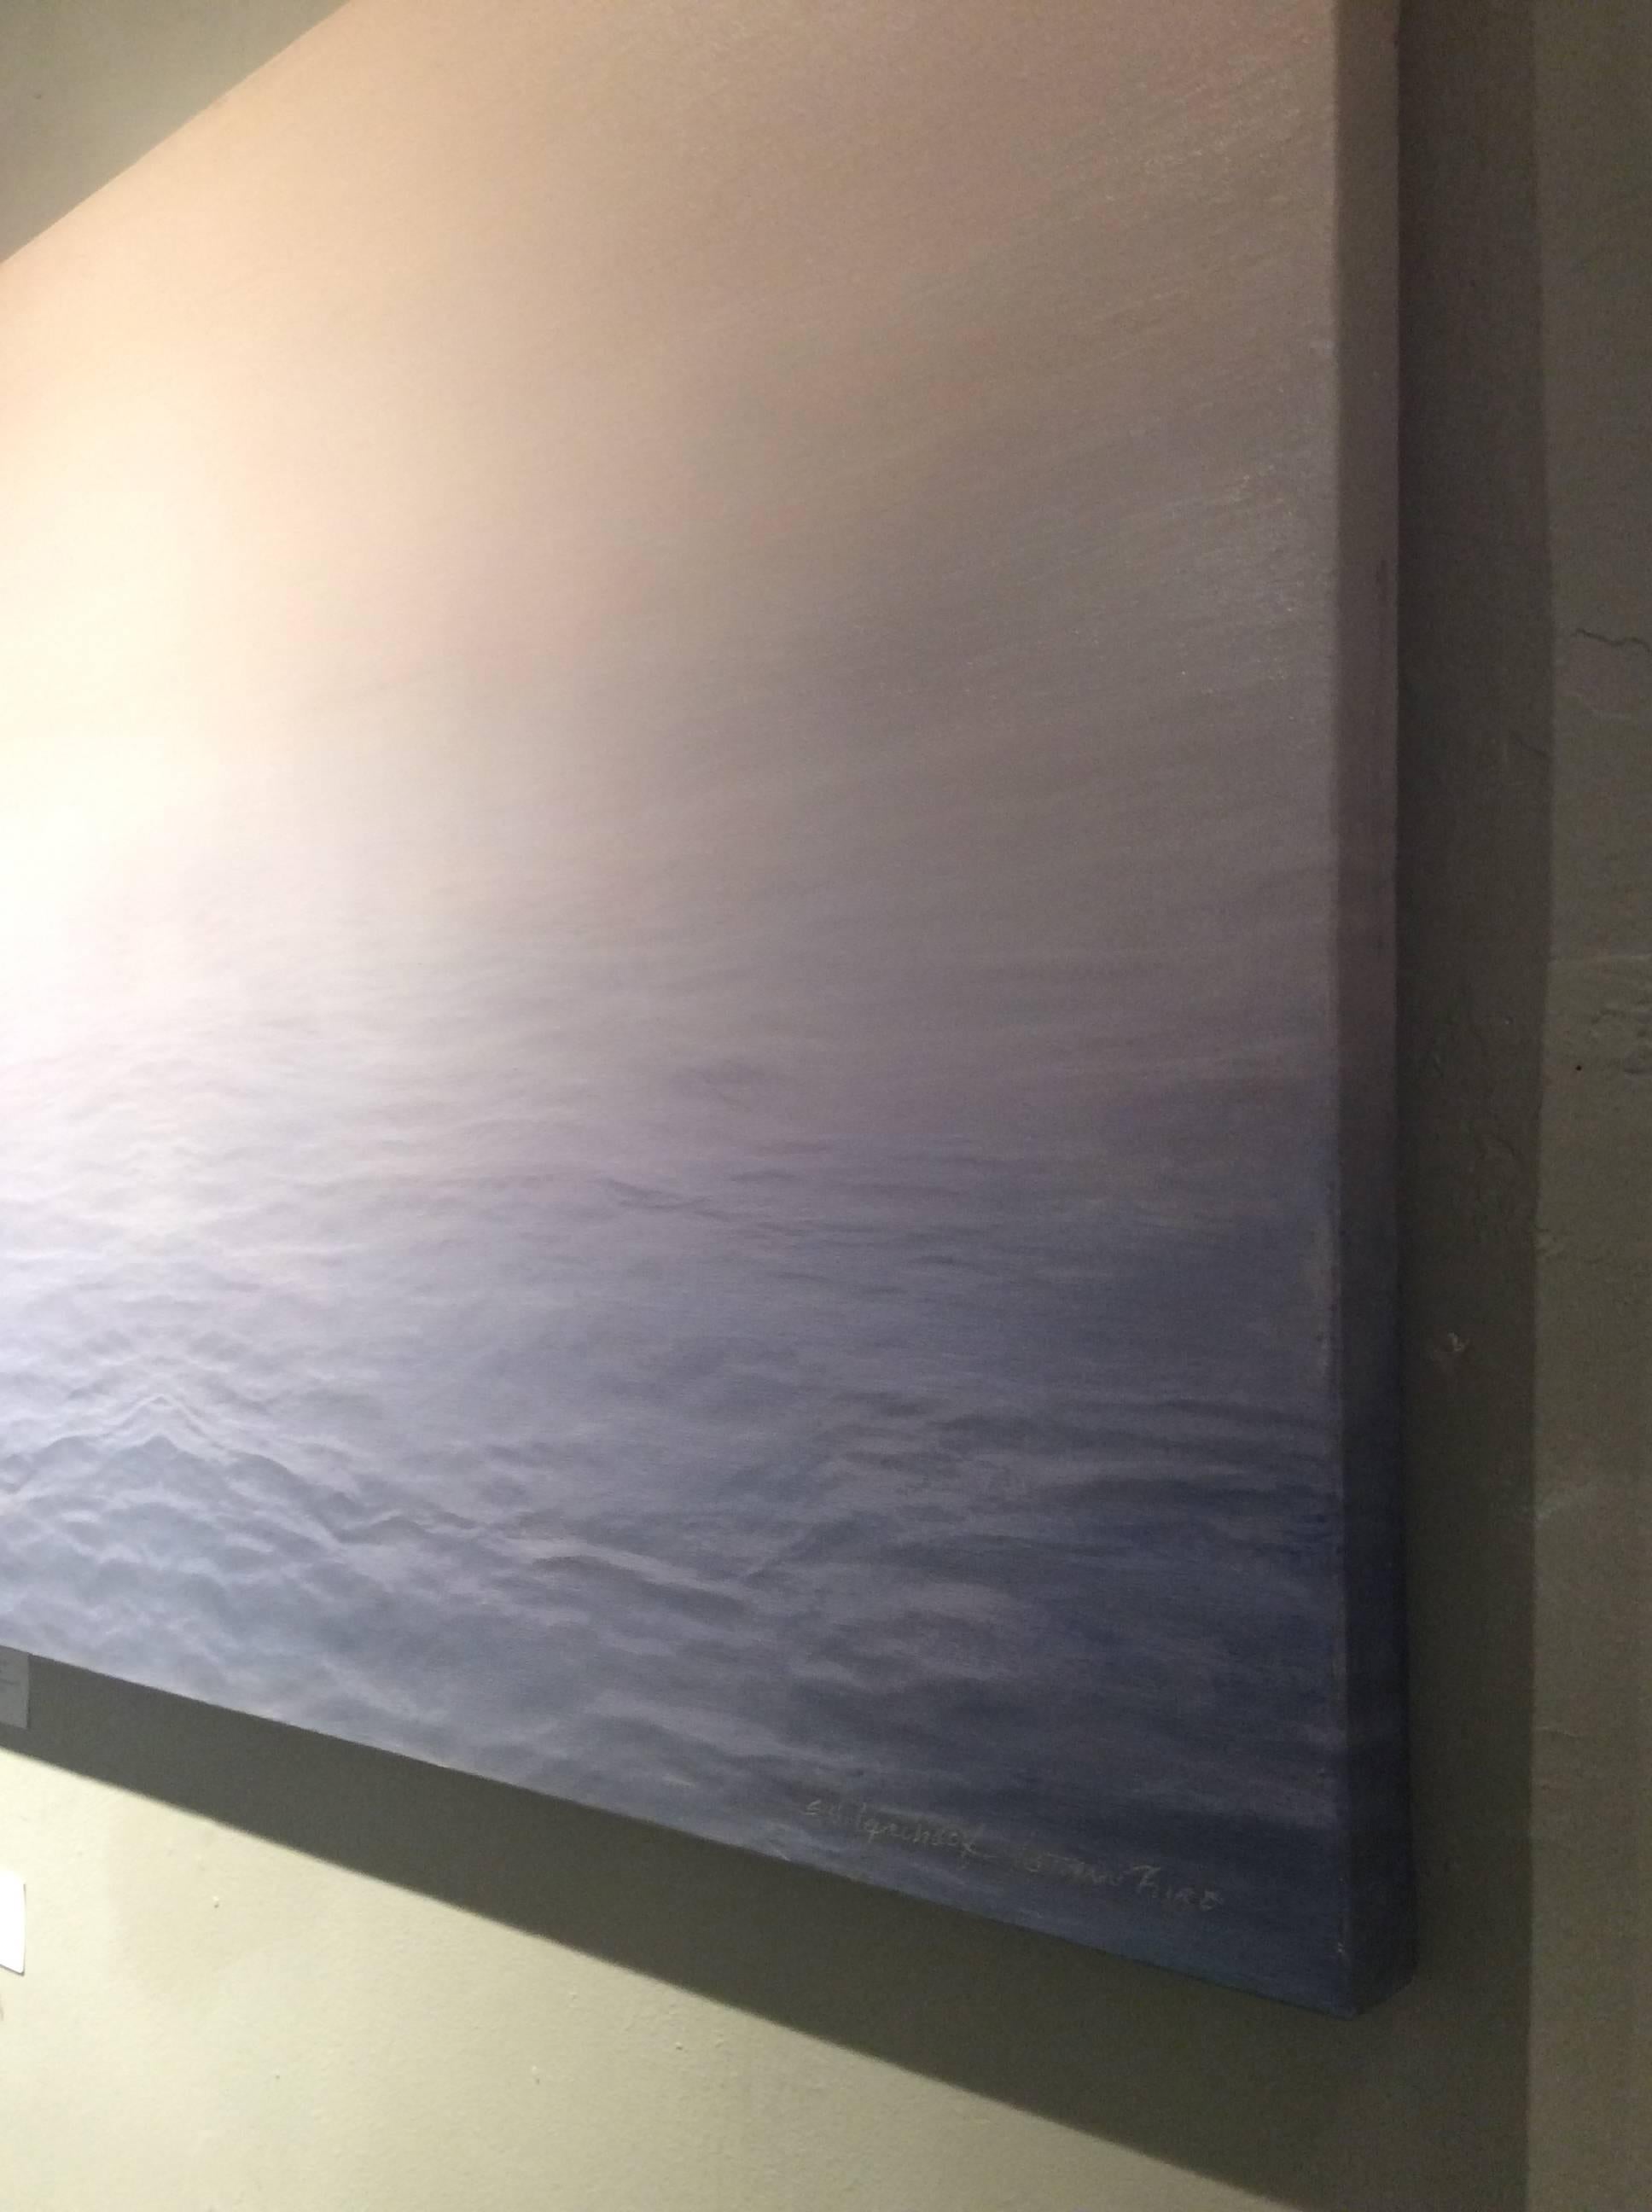 Limited edition archival pigment print, edition of 25
Printed on canvas, 36 x 93 inches 

This modern, horizontal archival pigment print on canvas was printed by Lependorf + Shire in 2004. The imagery is composed of a blue ocean horizon and a sunlit